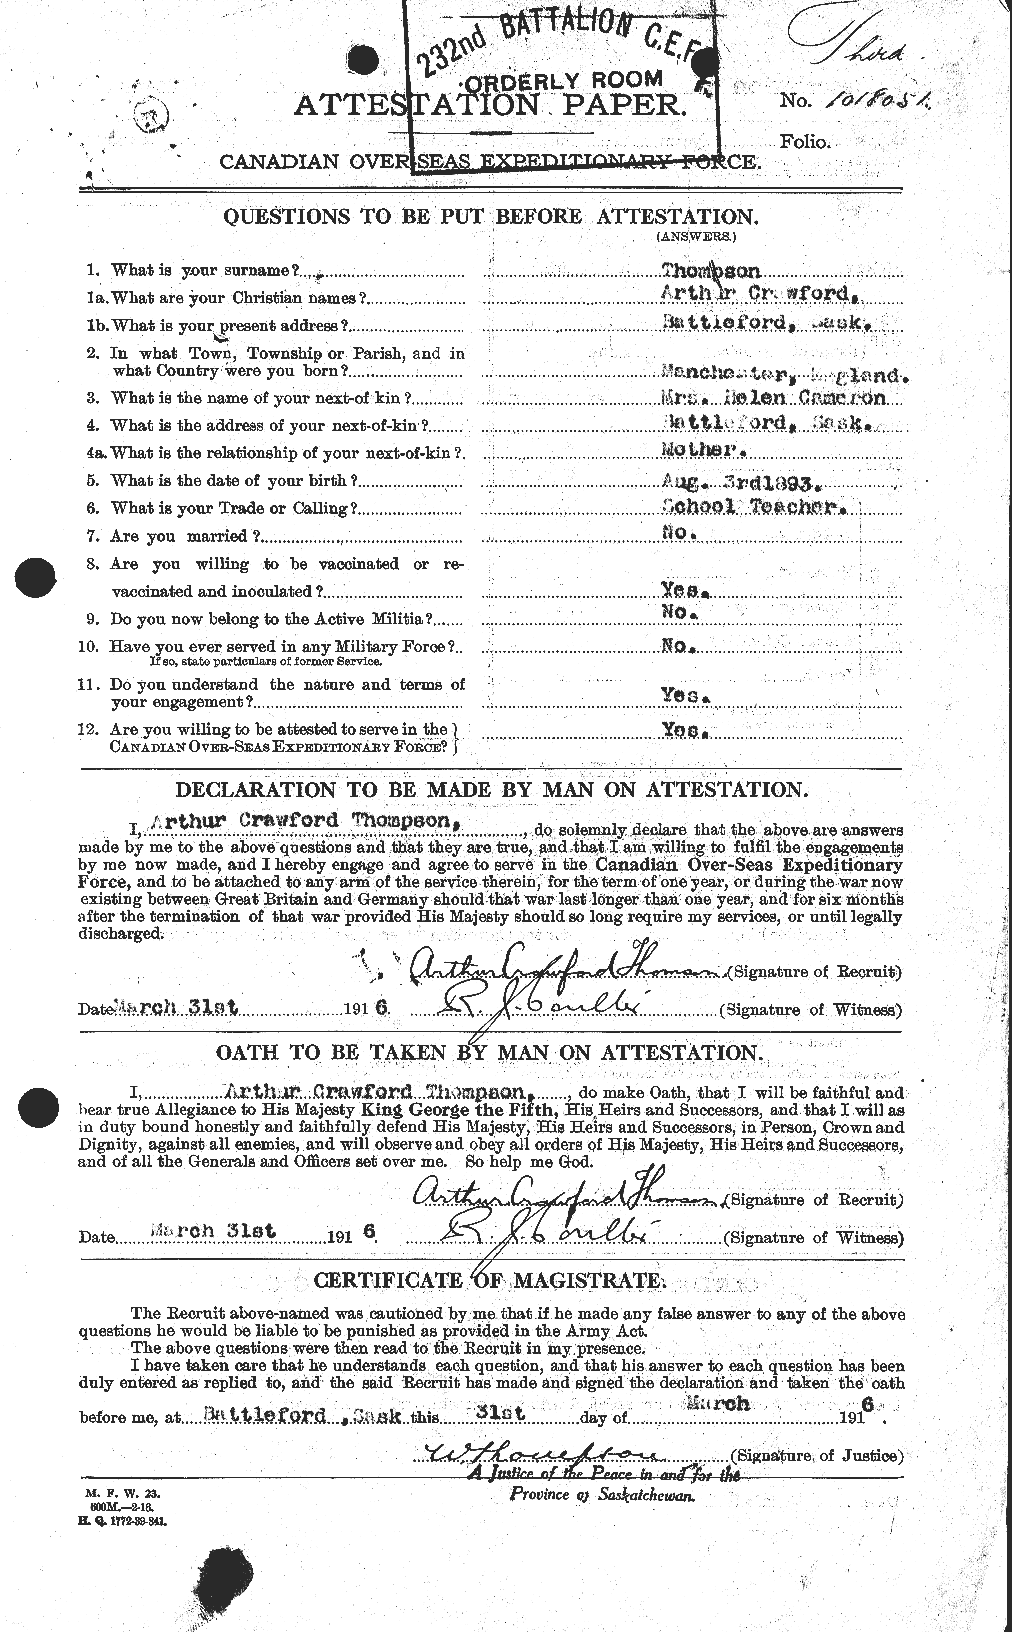 Personnel Records of the First World War - CEF 632269a